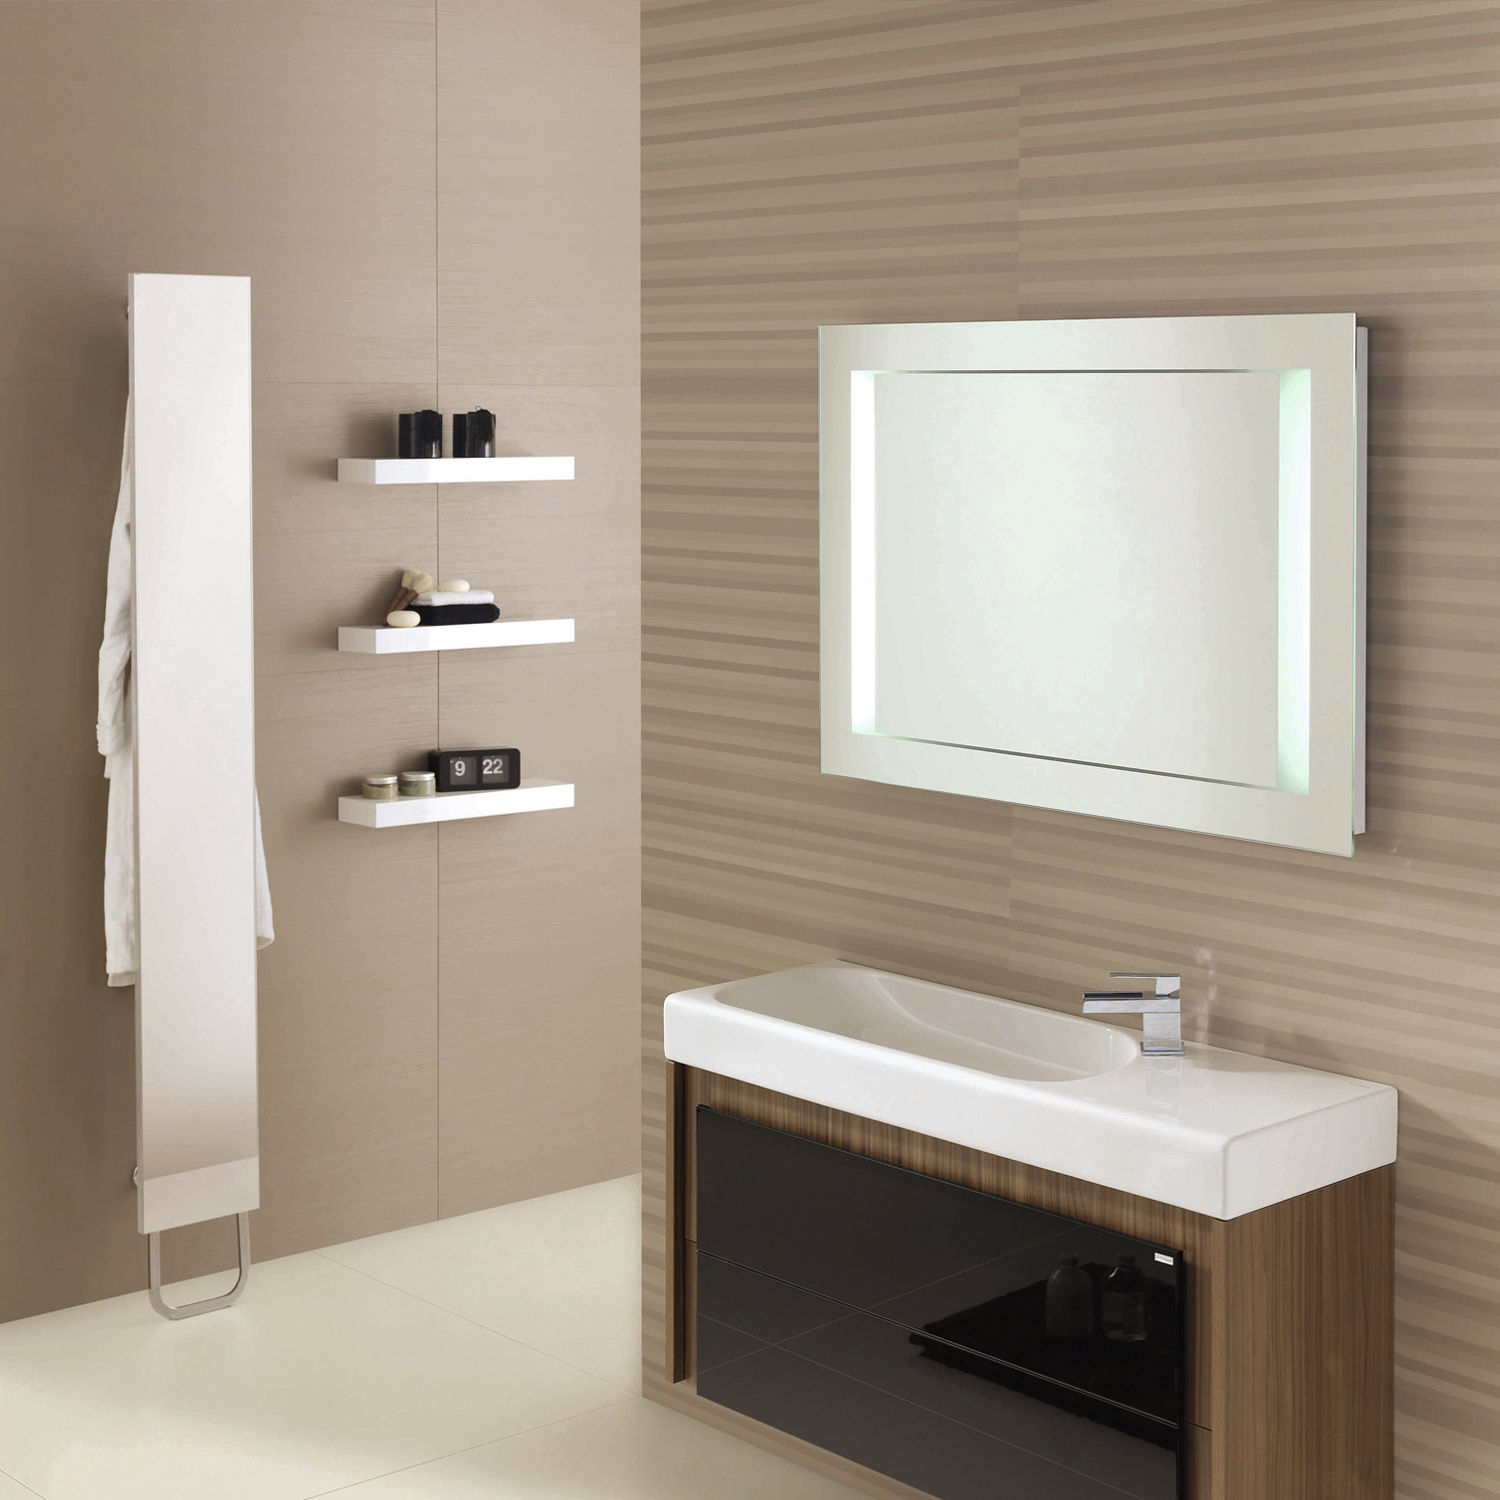 Bathroom Wall Cabinets For Bathroom Vanities Ideas pertaining to size 1500 X 1500